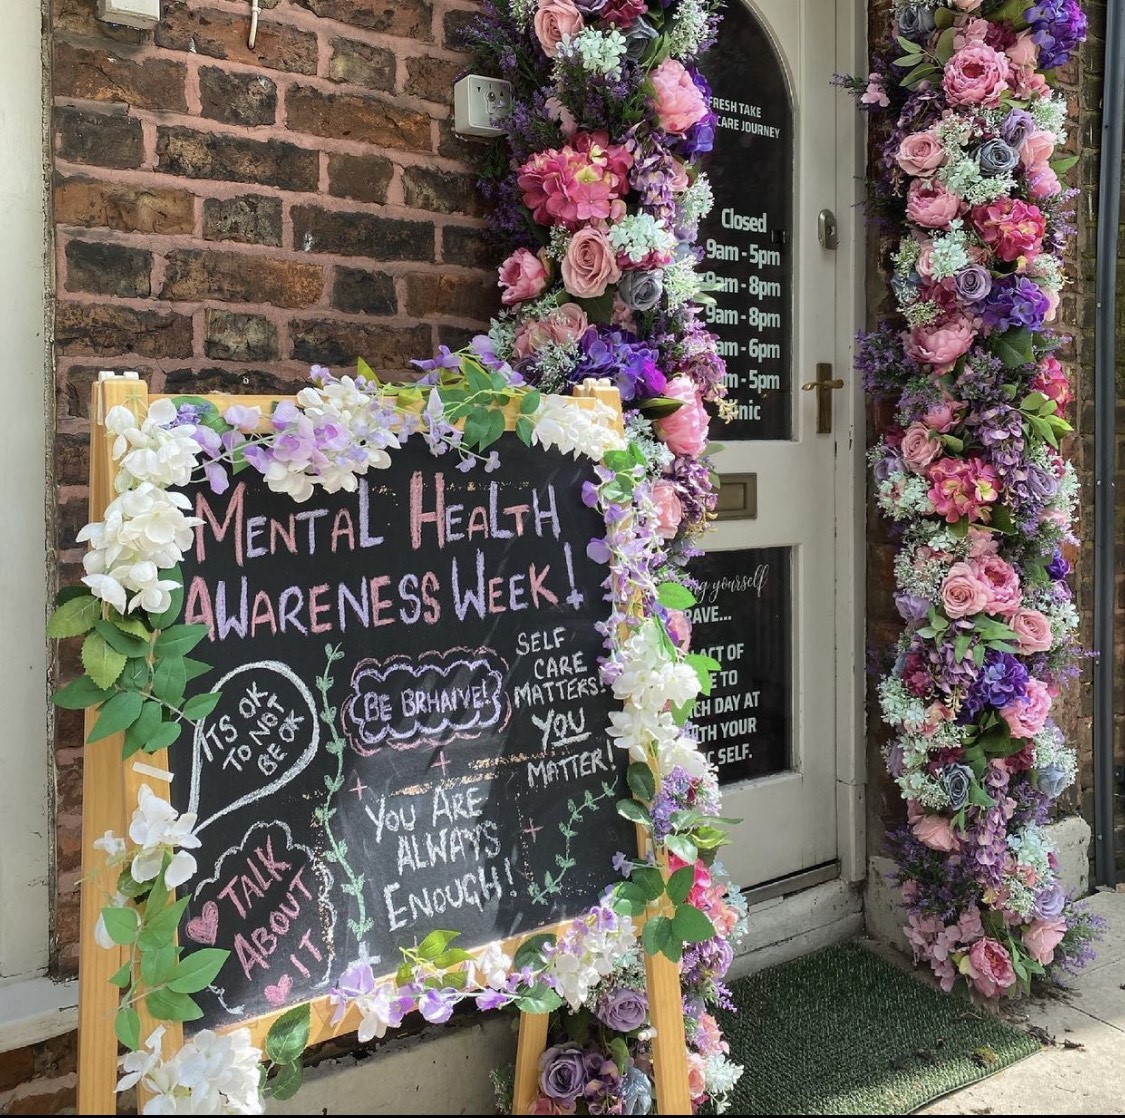 The entrance to the salon is an archway of flowers